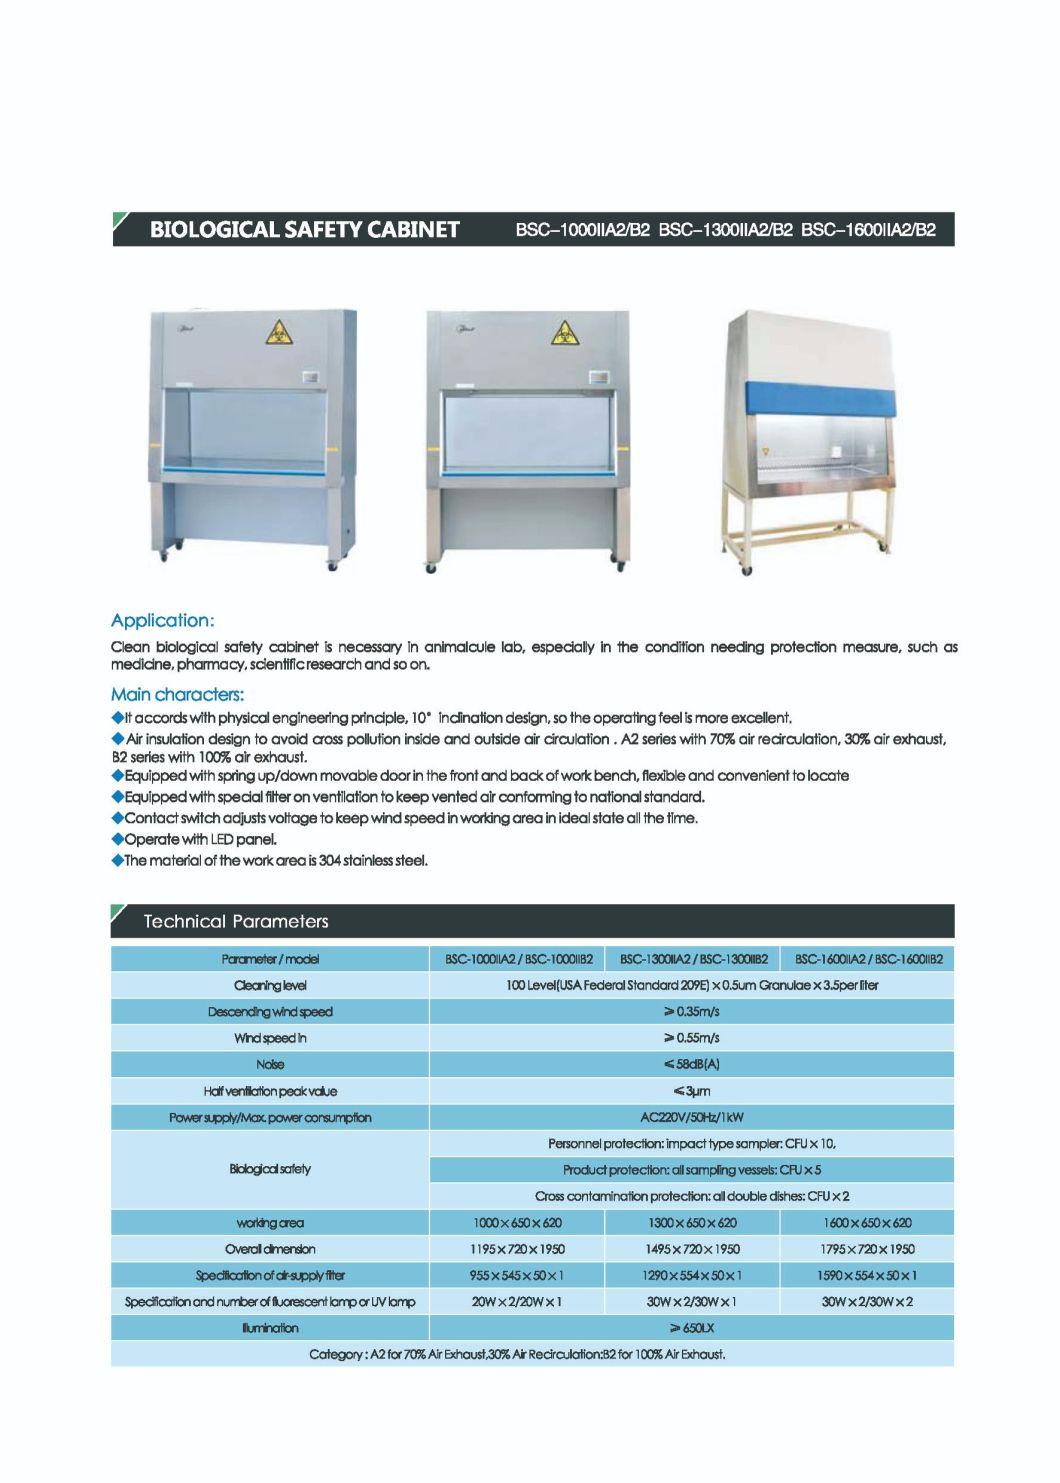 Class II Biological Safety Cabinet Biosafety Cabinets